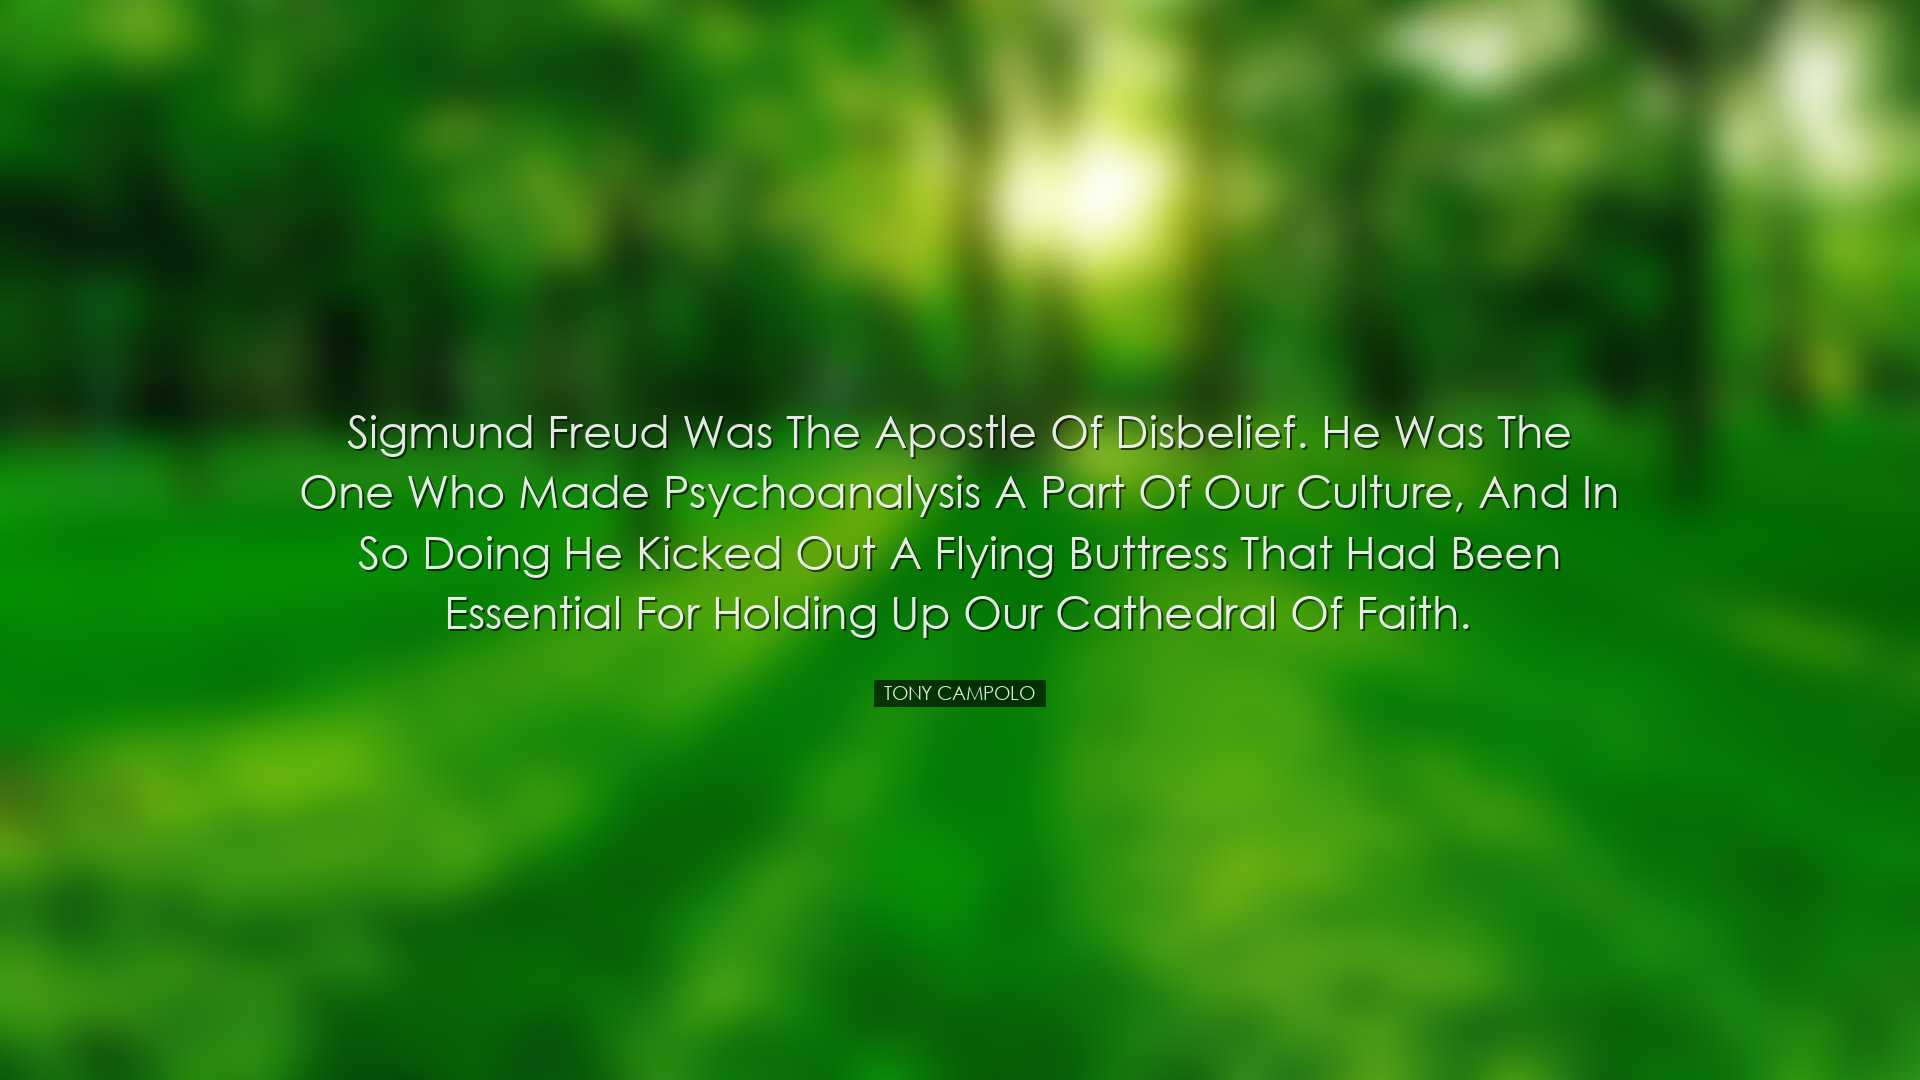 Sigmund Freud was the apostle of disbelief. He was the one who mad